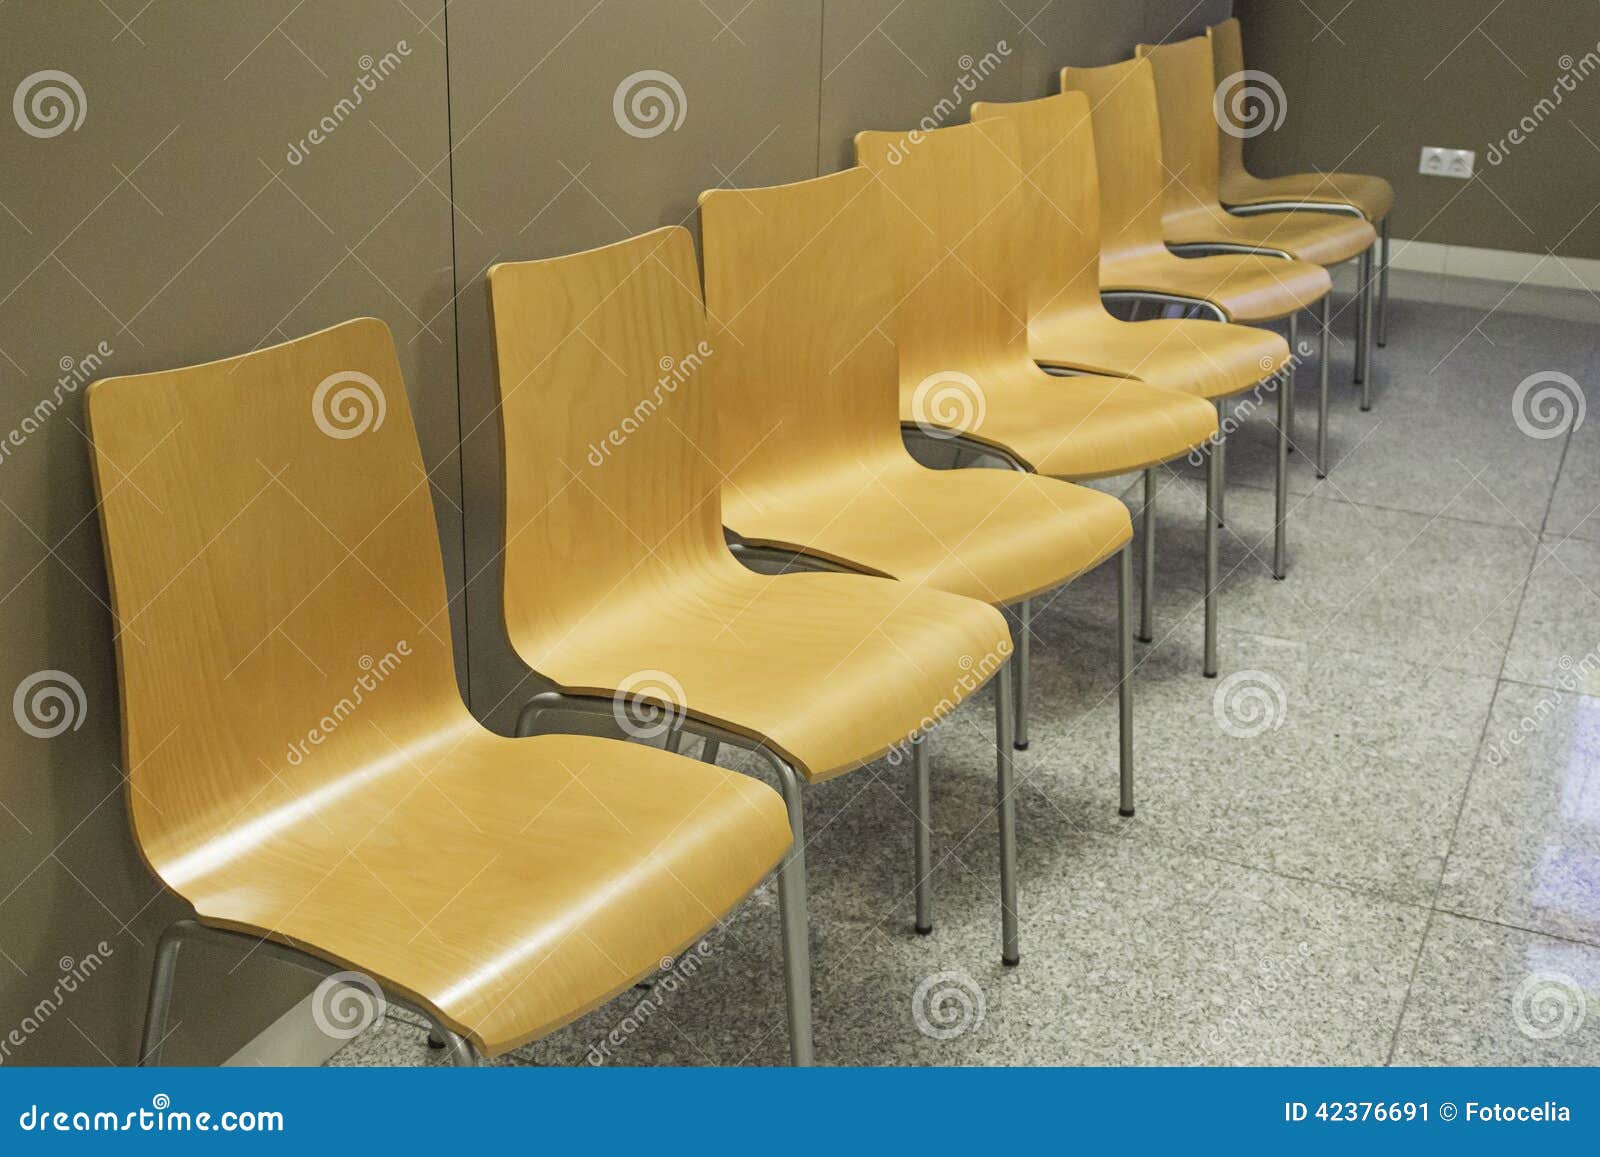 Chairs In Waiting Room Stock Image Image Of Furniture 42376691